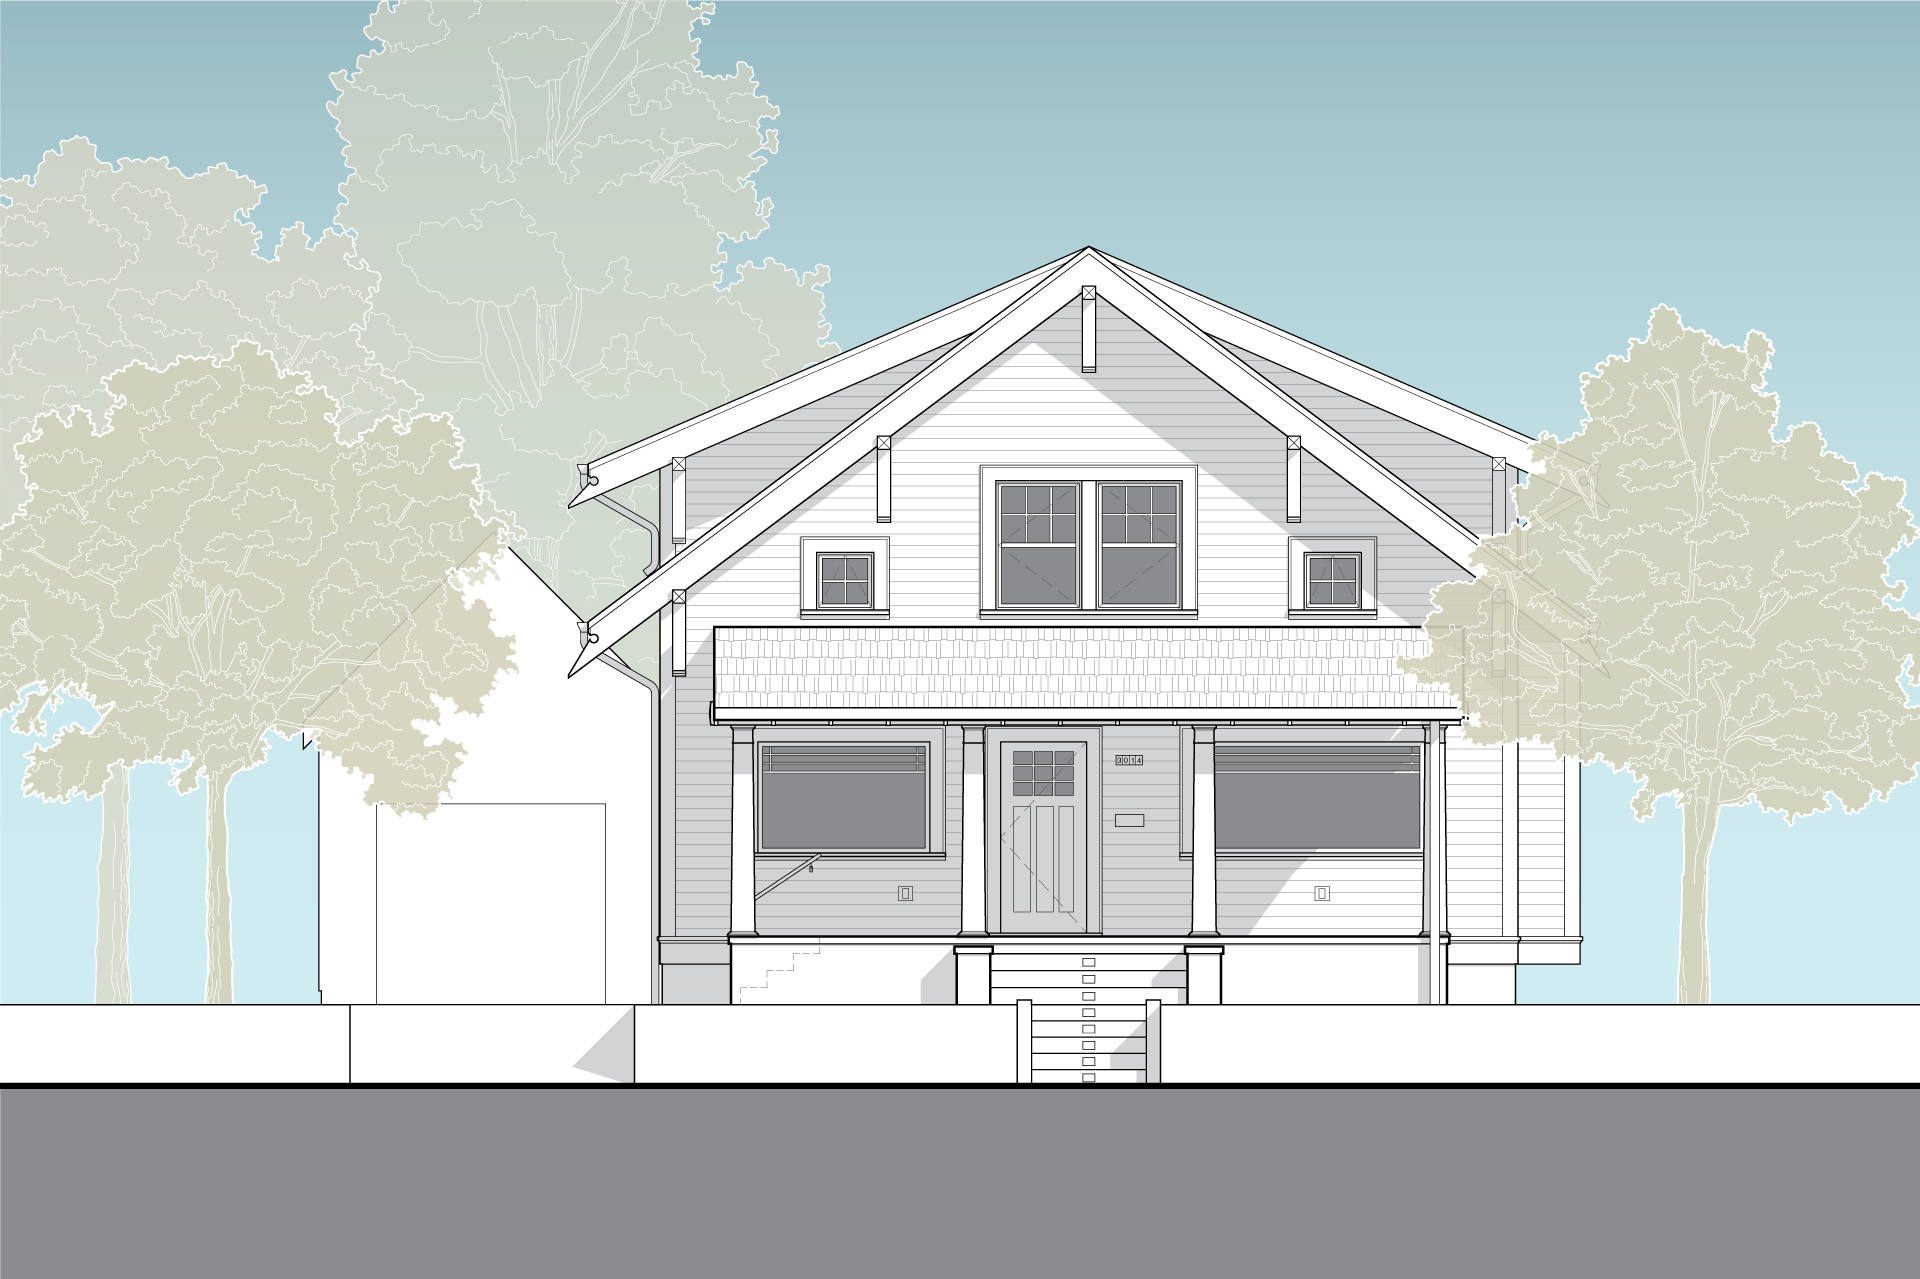 This is a drawing of the front elevation of the Alameda Craftsman after being renovated.